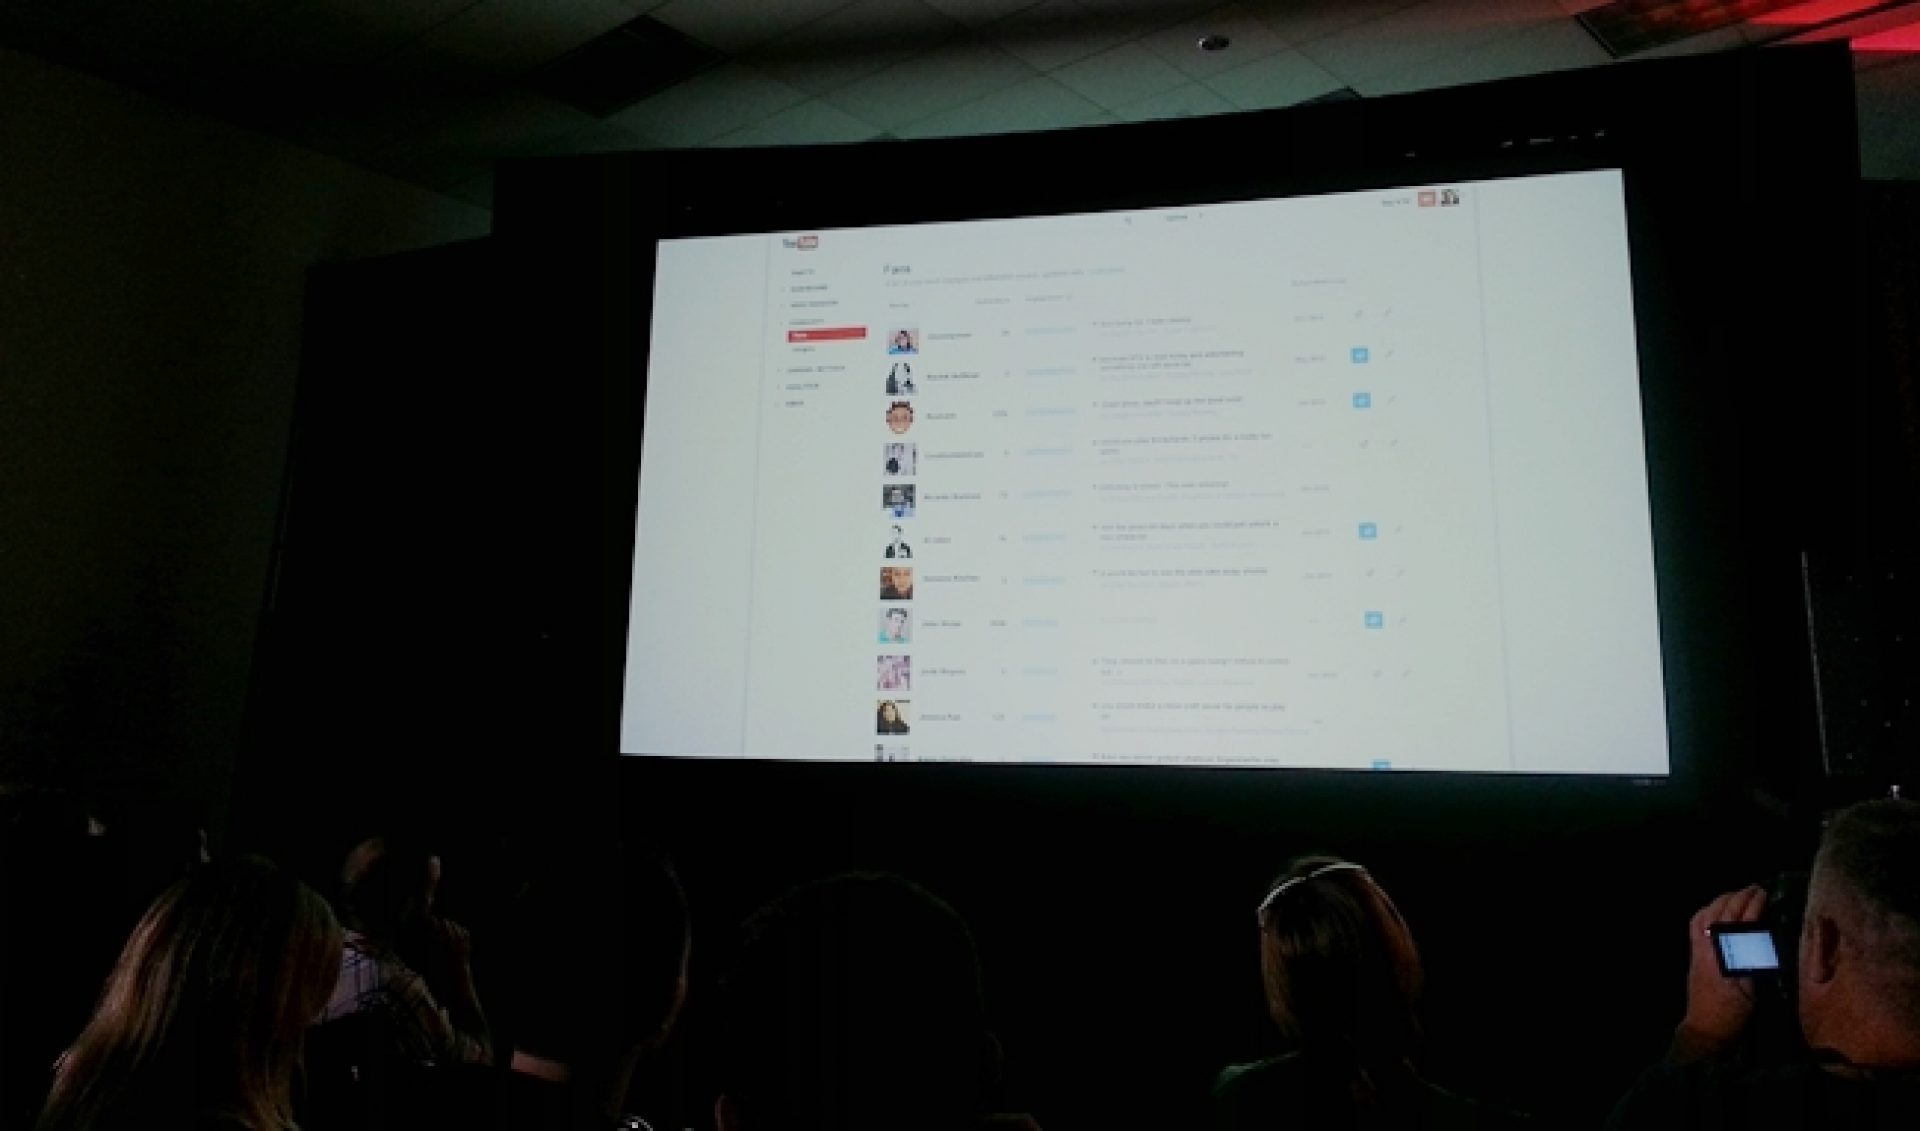 YouTube Will Let Creators Single Out Their ‘Top Fans’ On Google+